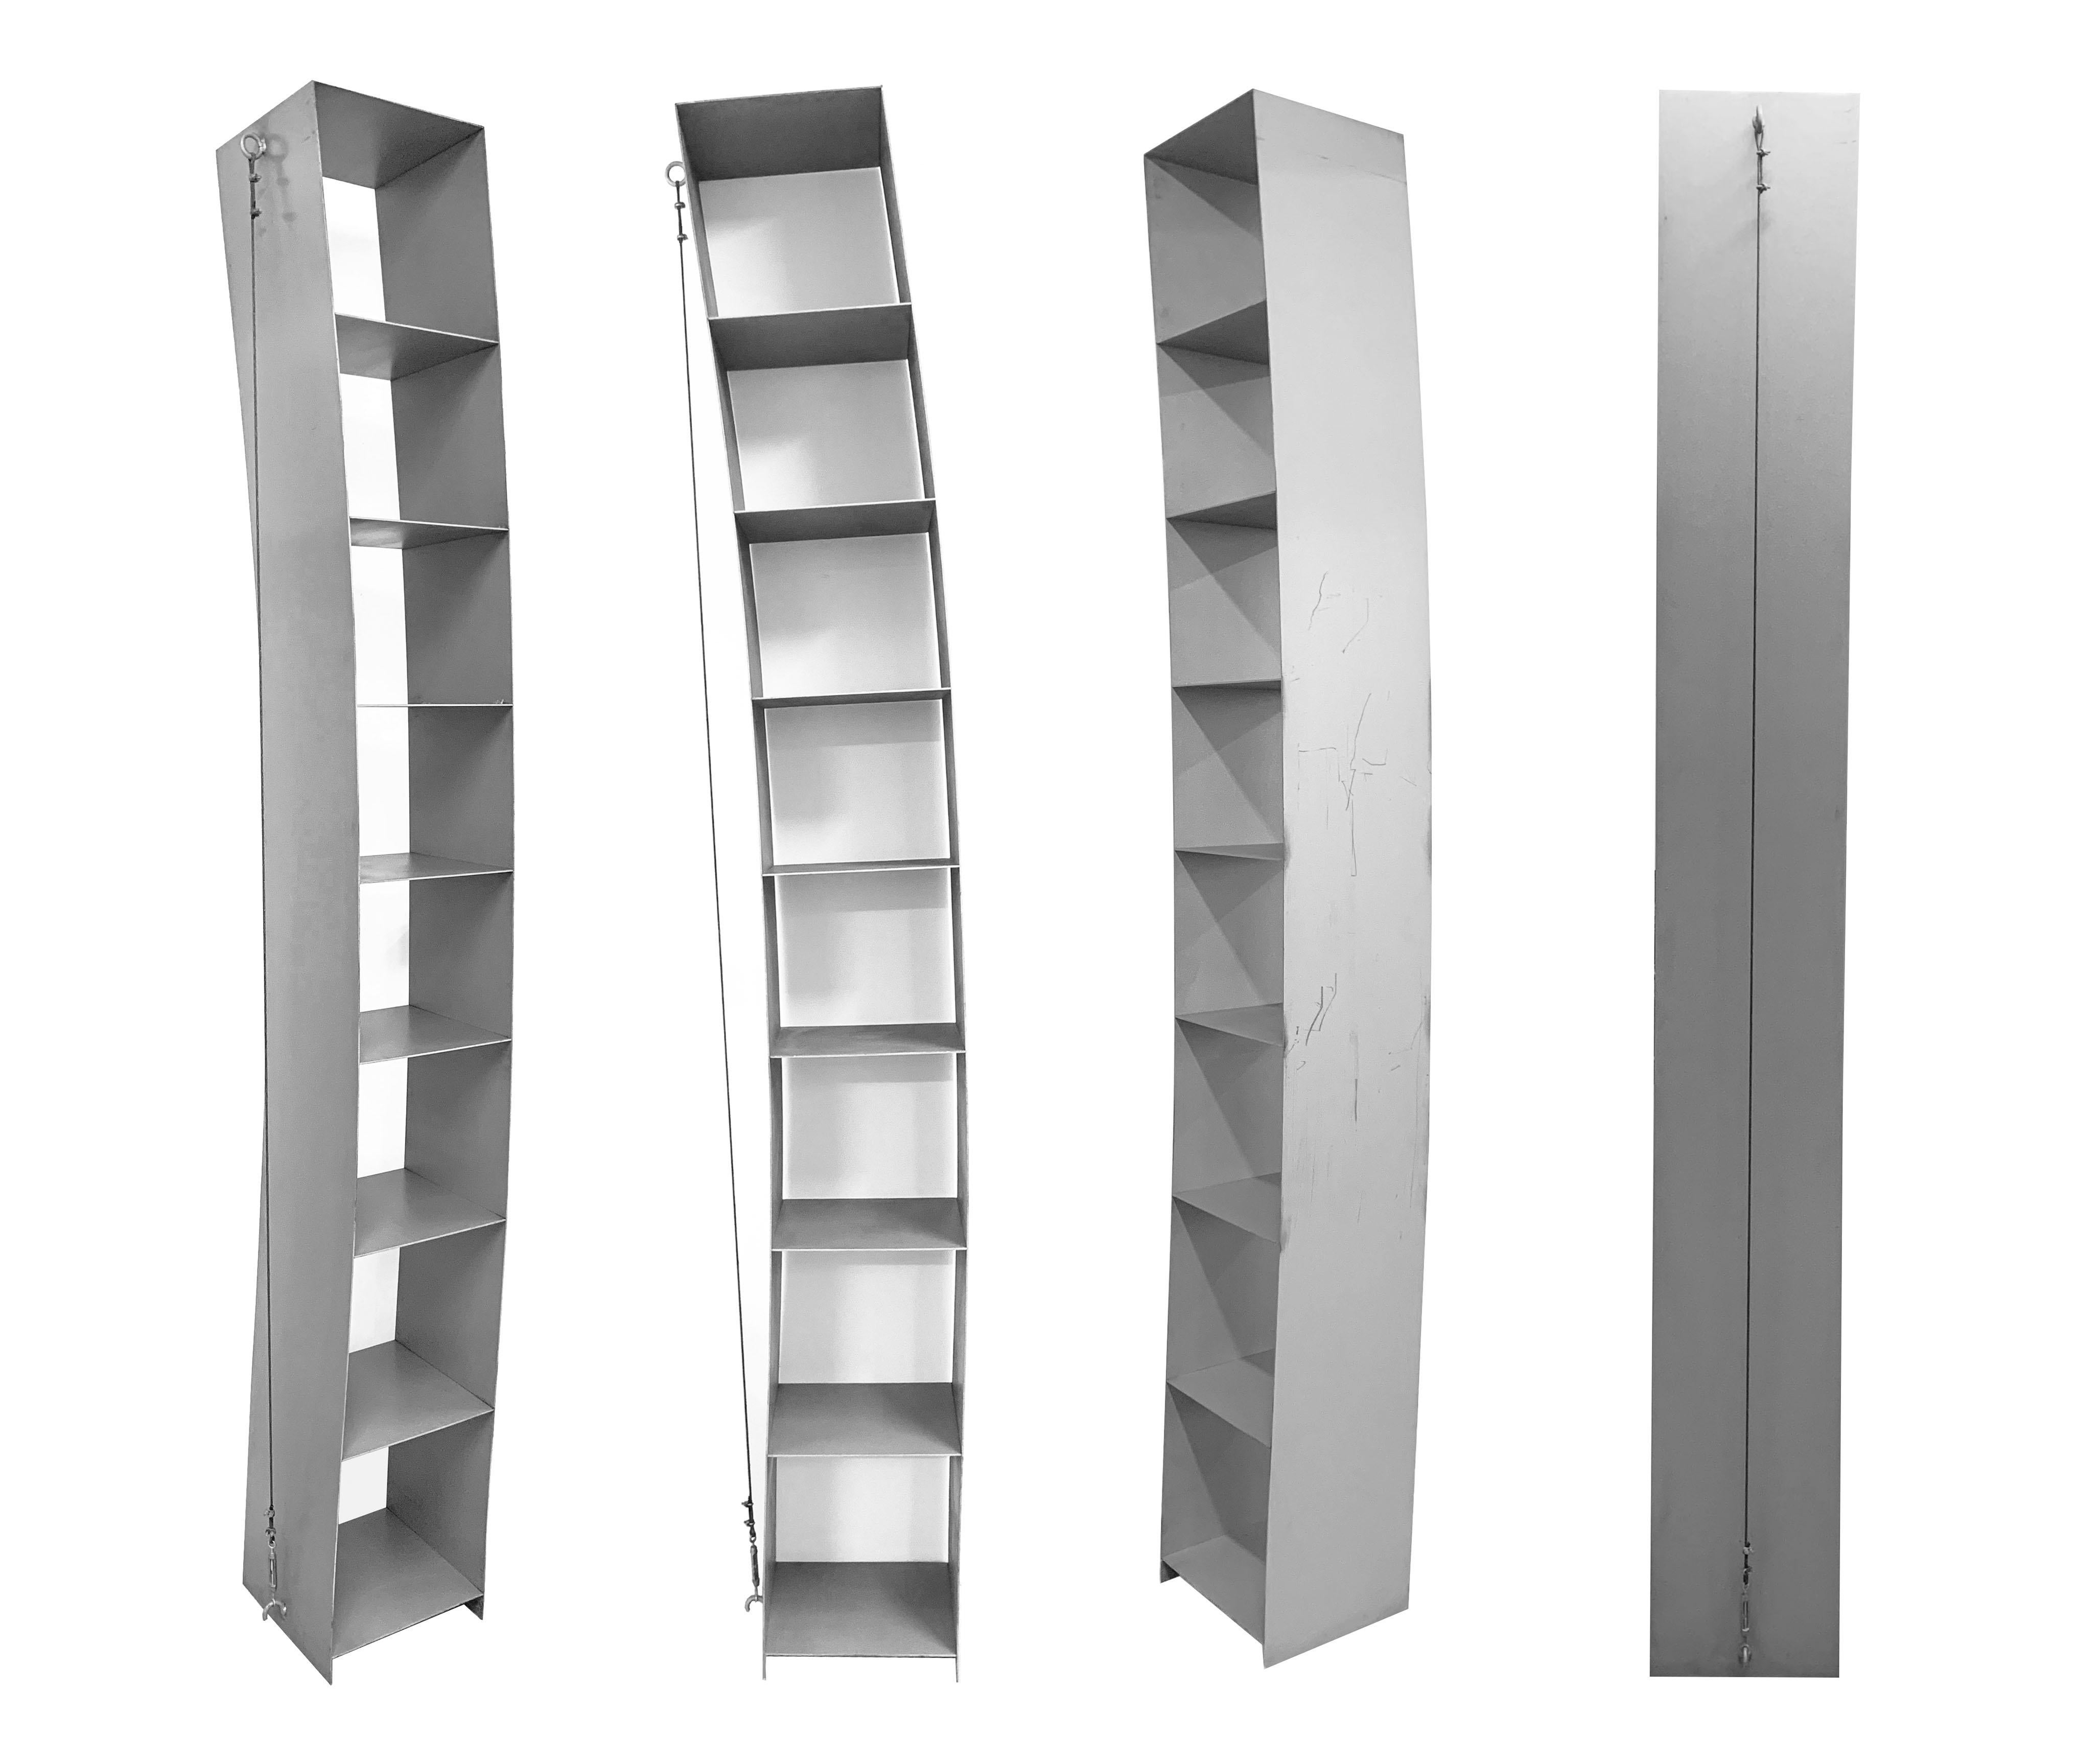 Fantastic item designed by Wolfgang Laubersheimer and produced by Pentagon Group, Germany, 1984.

This bookcase, called 